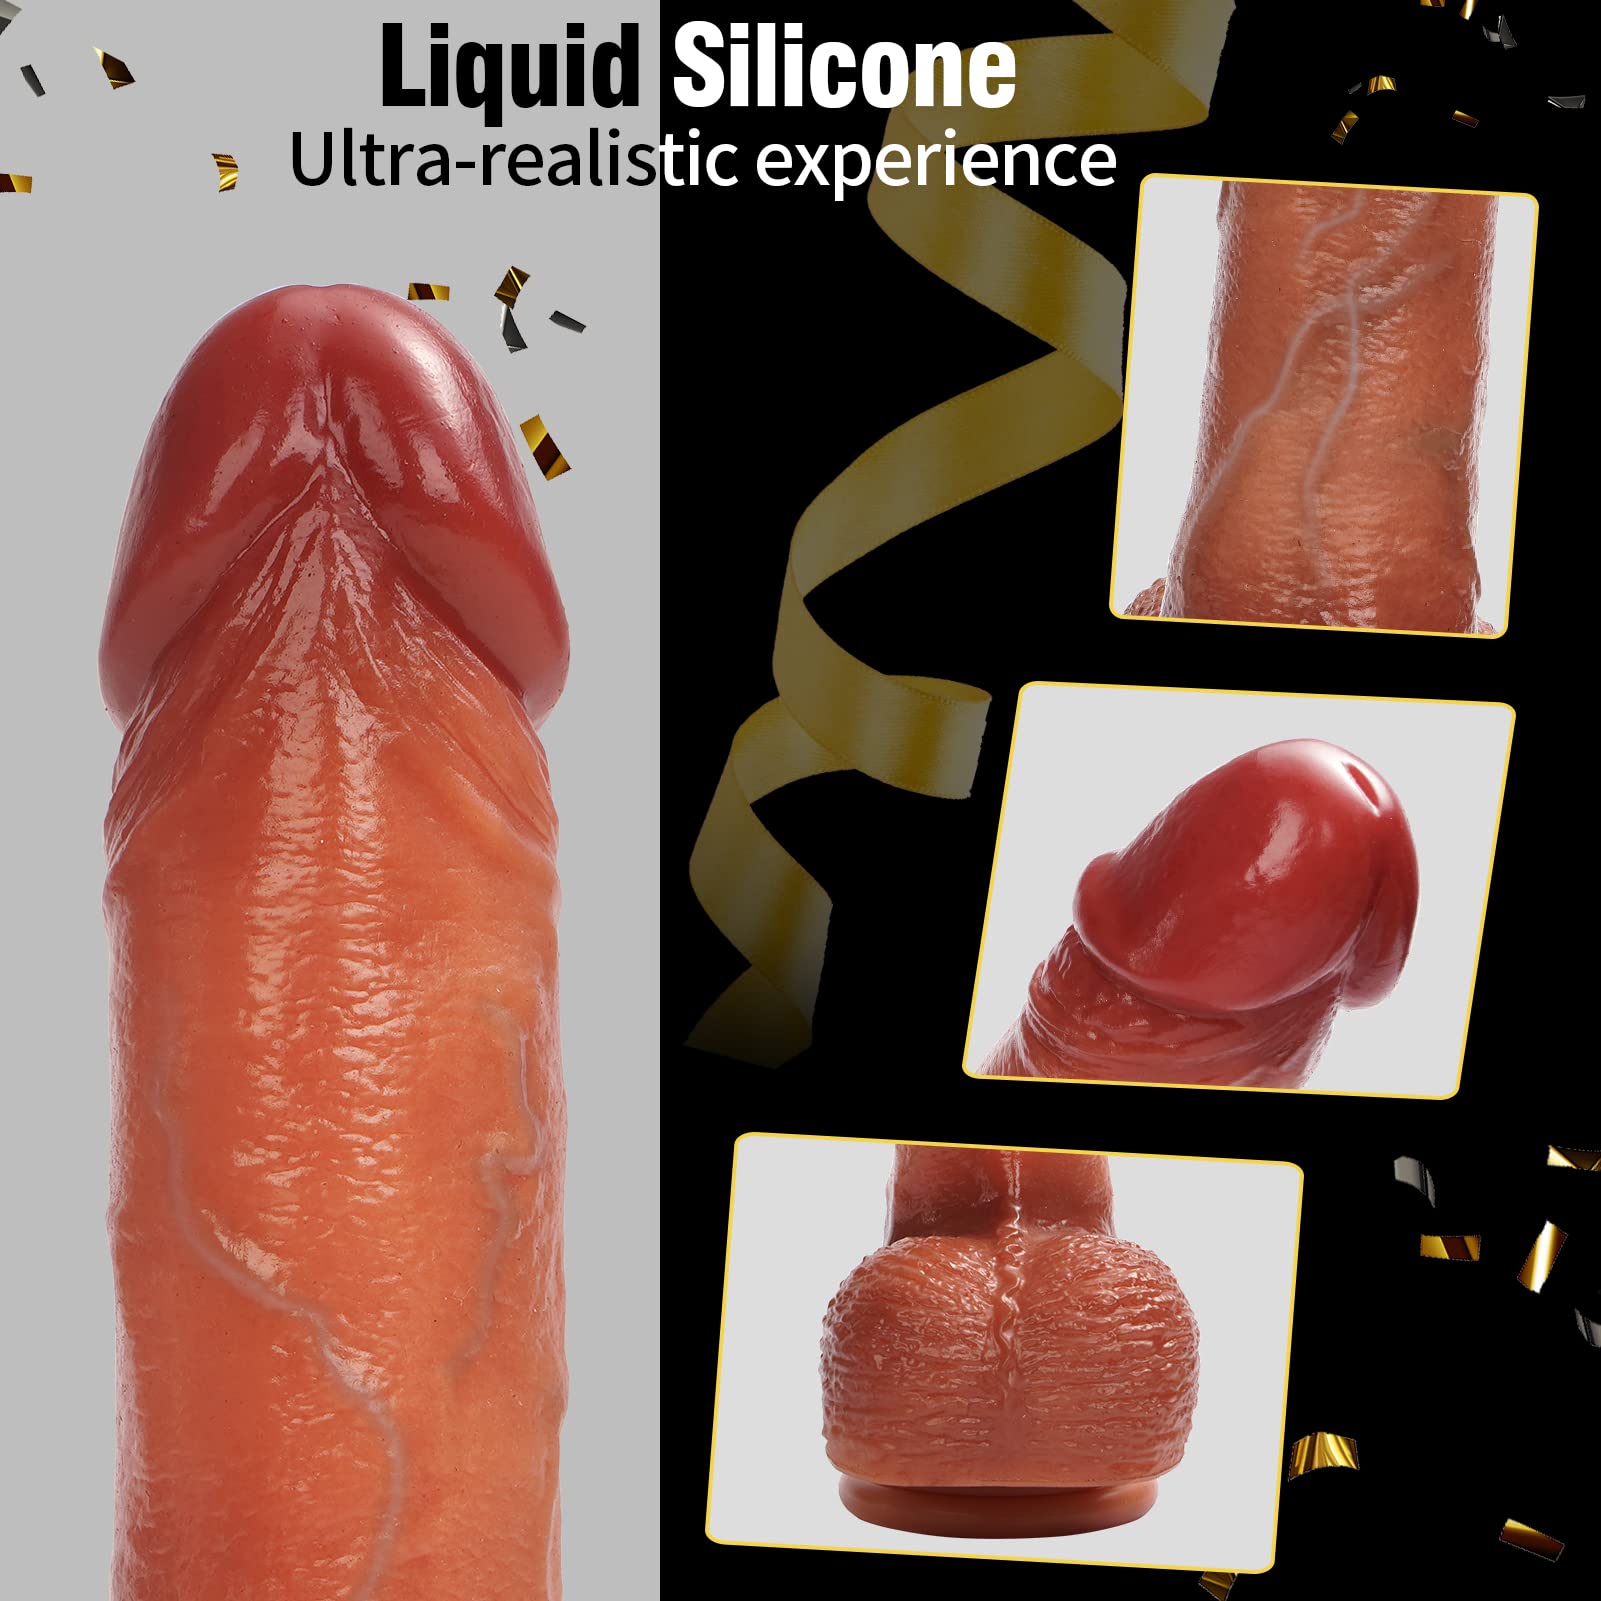 FIDECH Super Lifelike Multi Function Heating Automatic Dildo with Remote Controller